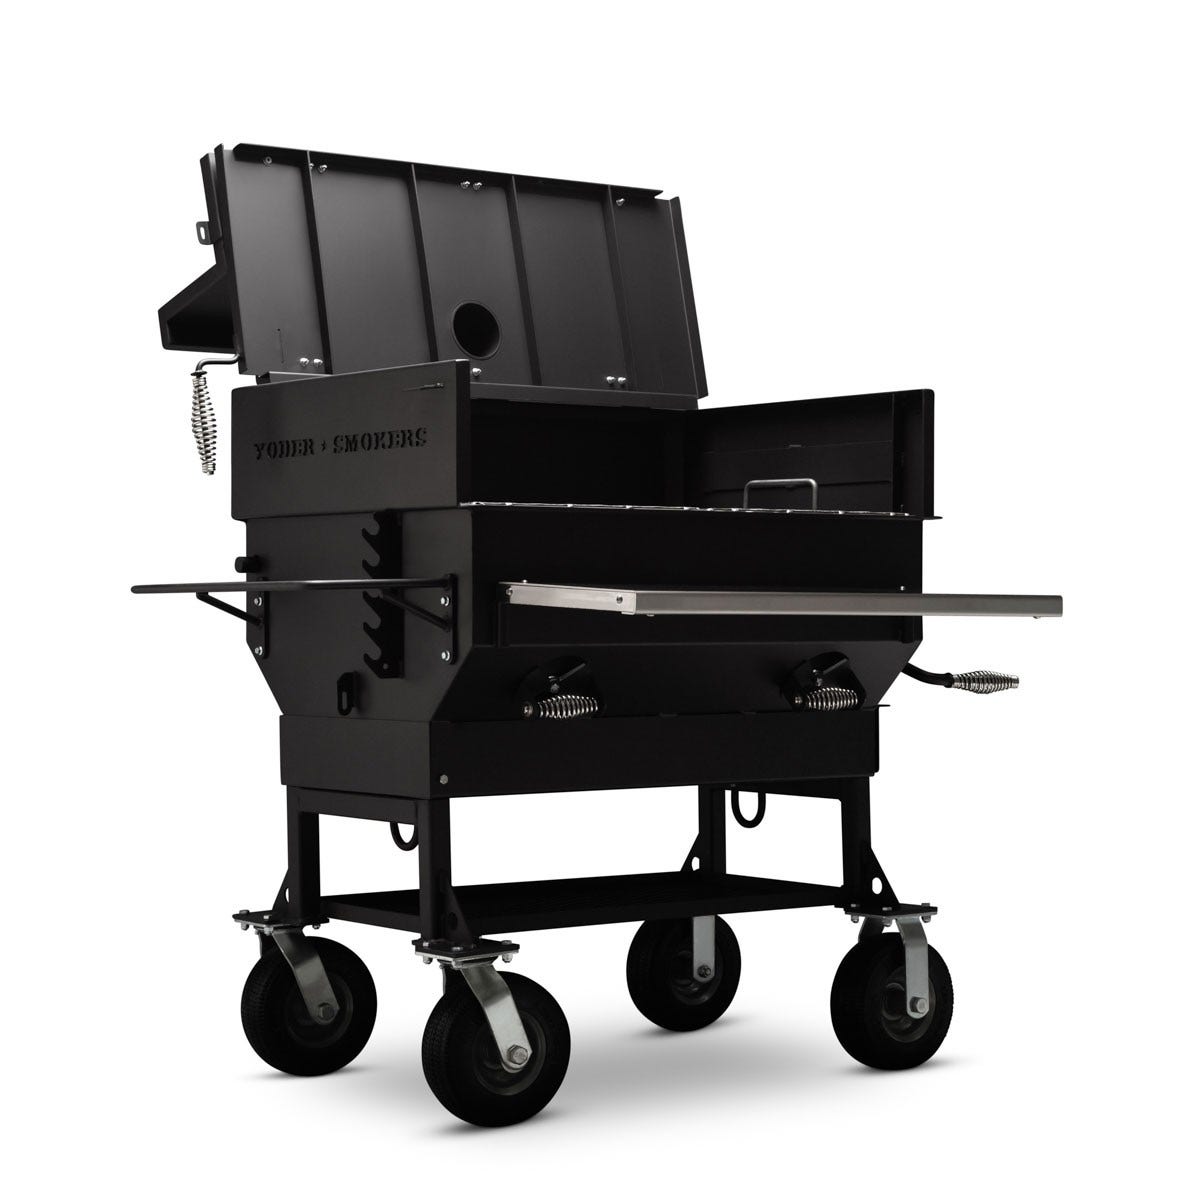 Yoder Smokers Adjustable Charcoal Grill Outdoor Grills 24" x 36" Charcoal Grill 11010003